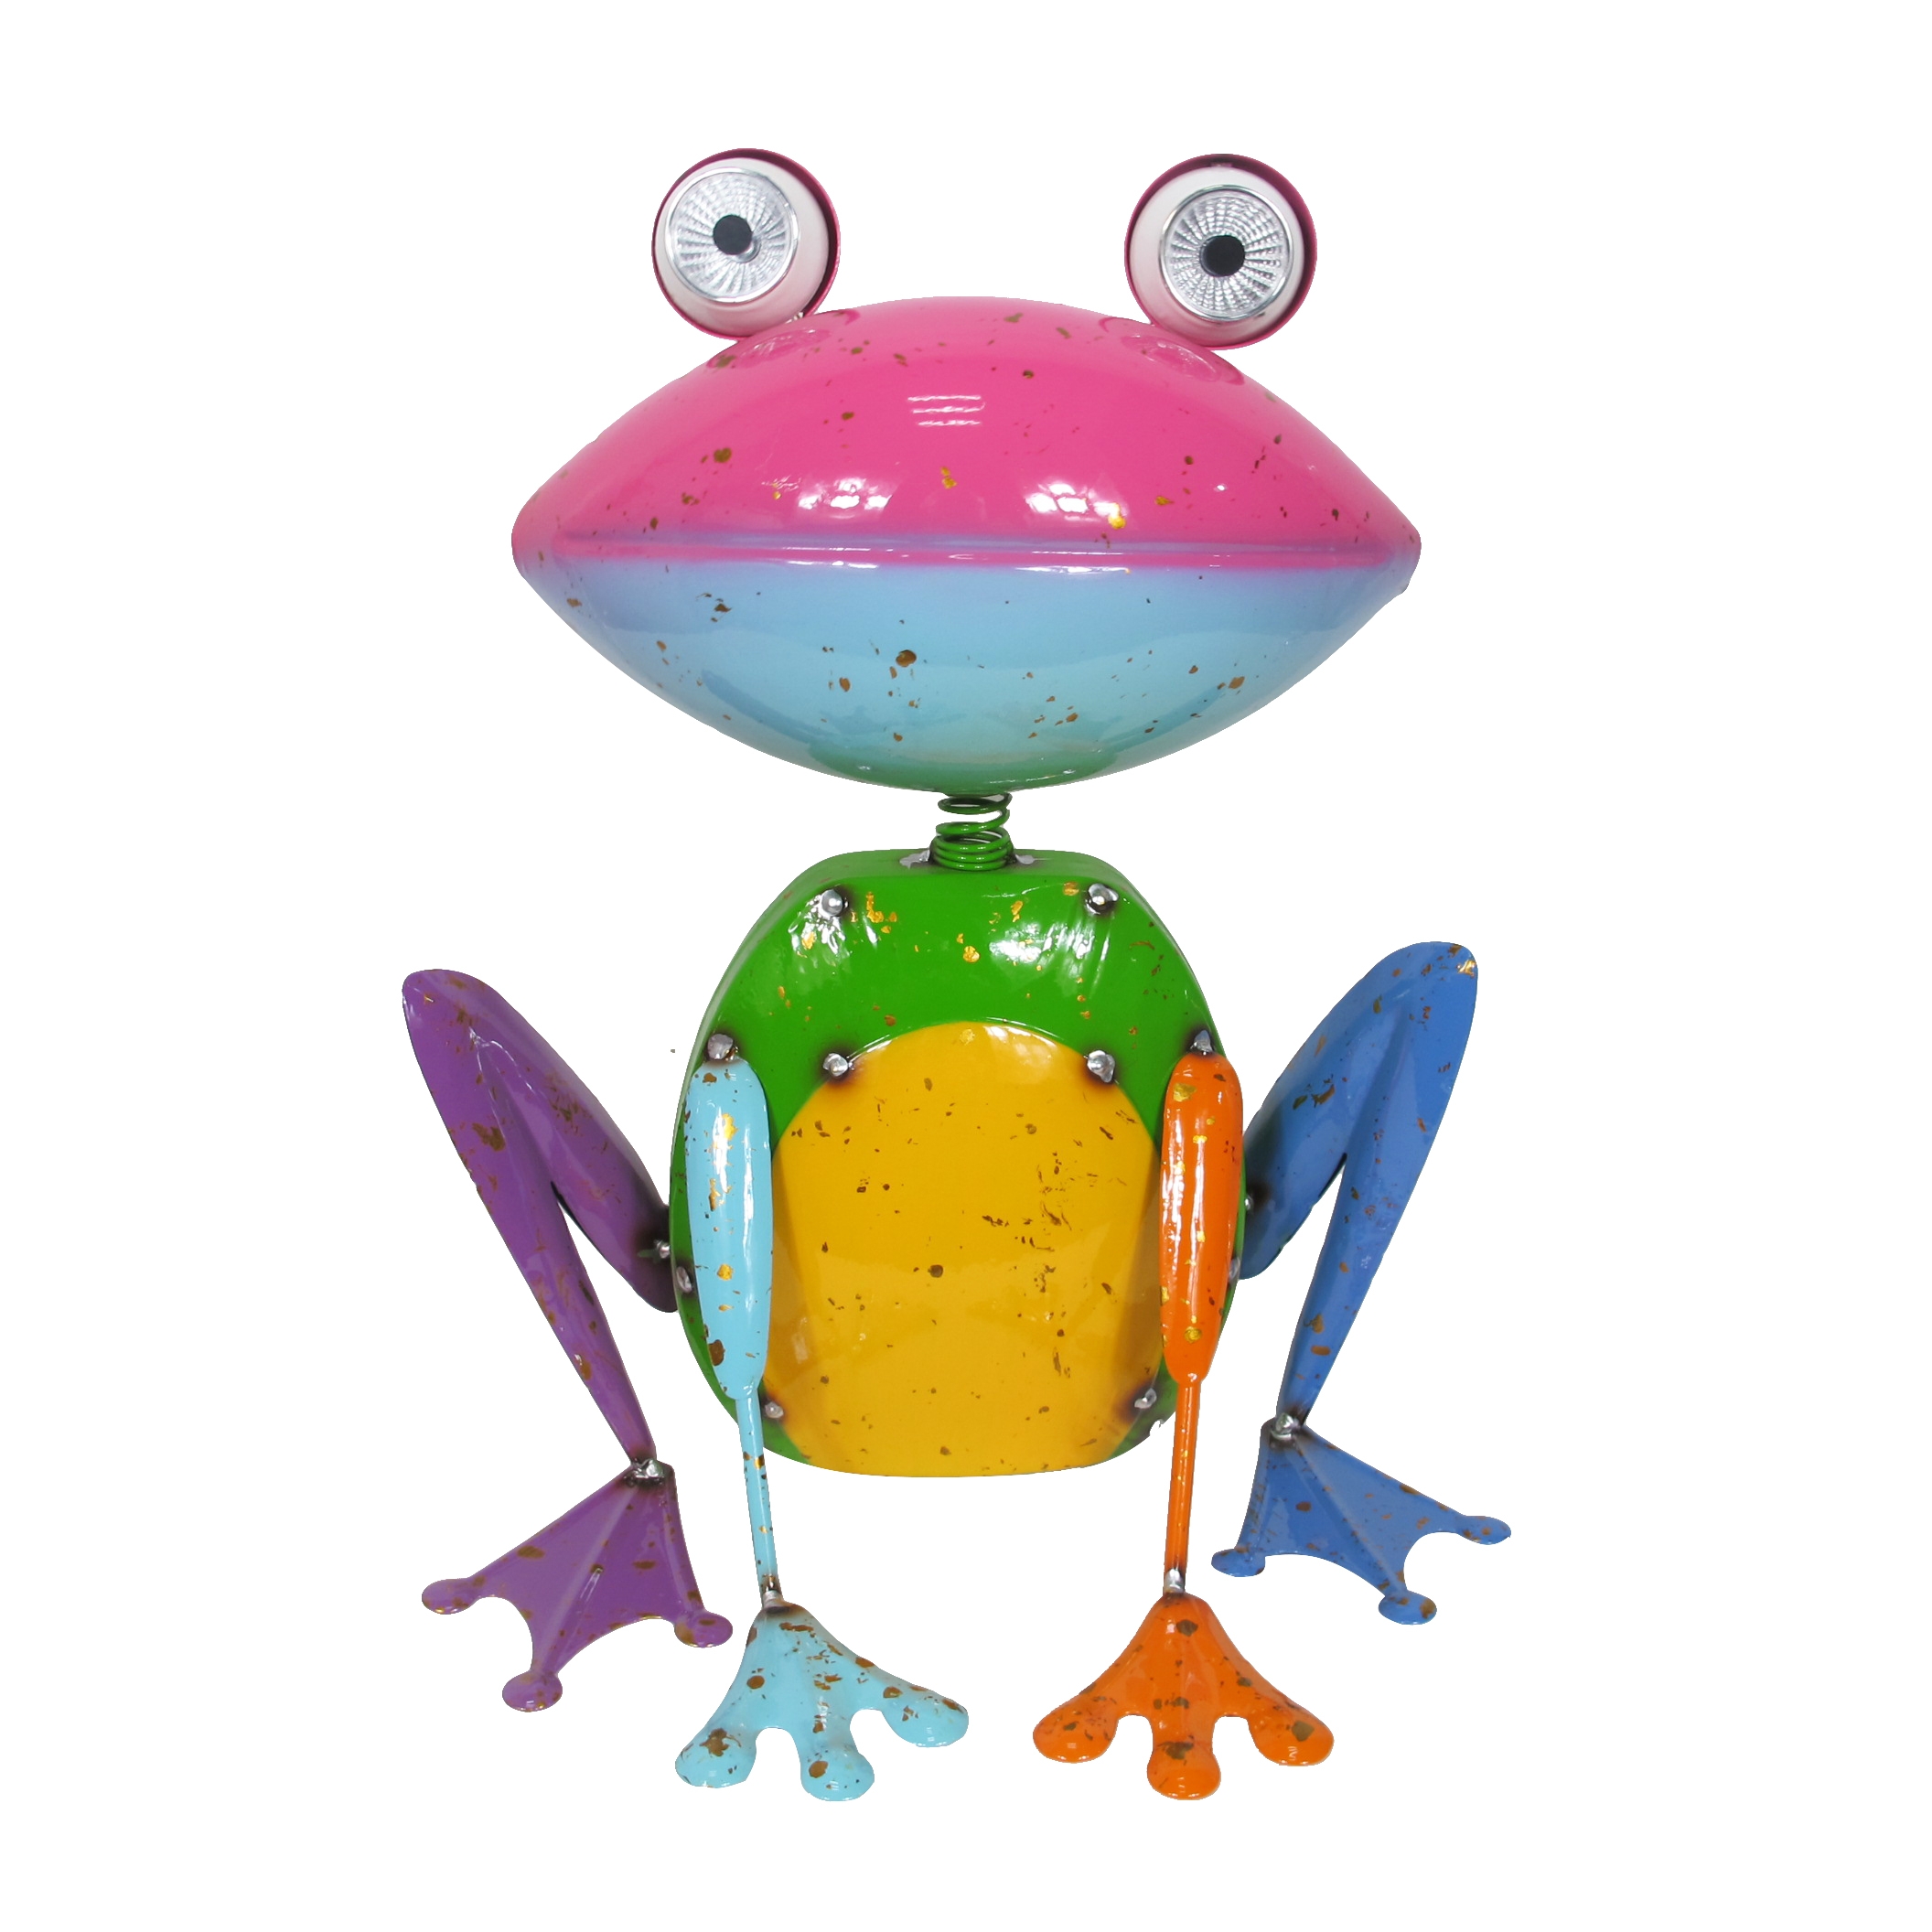 CAC20707B // Metal frog Statue with Solar Lights - Pink Head